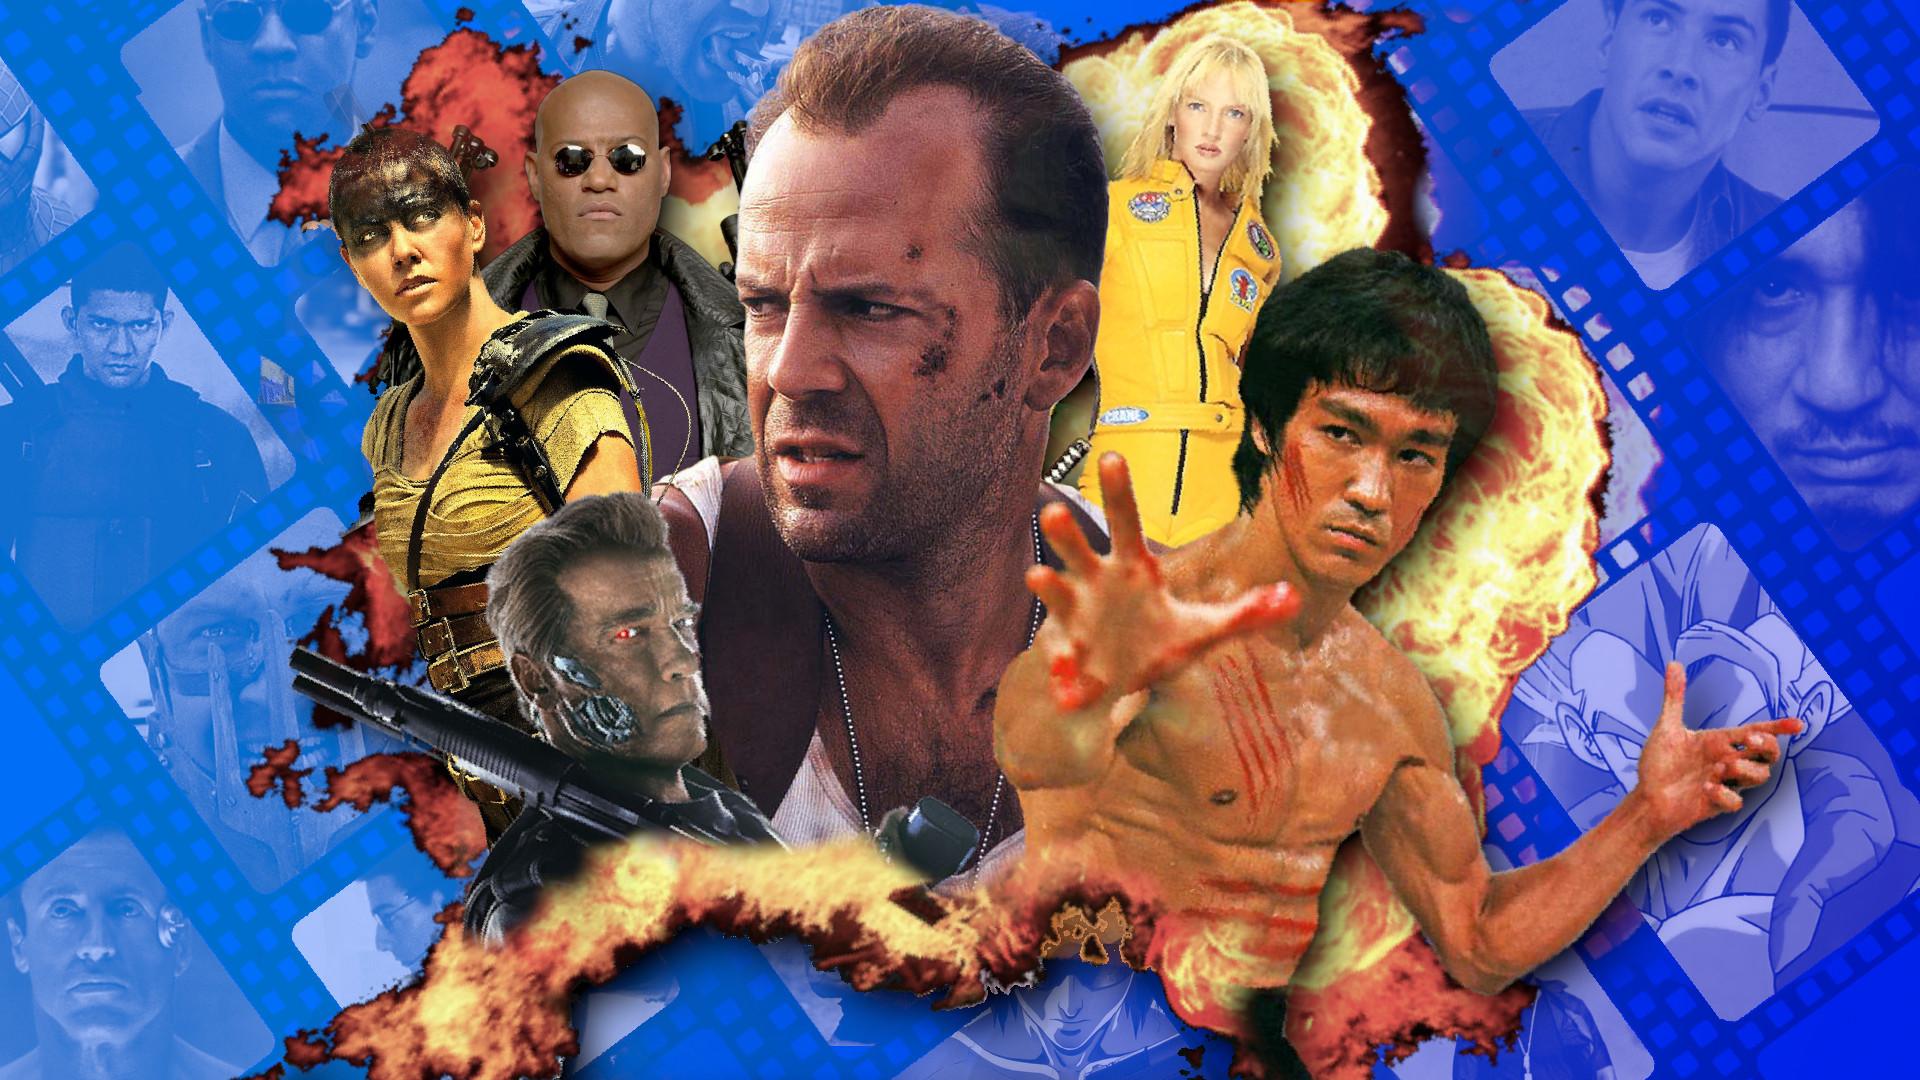 John McCLane, the T-1000, Bruce Lee, Morpheus, Furiosa, and The Bride stand in an explosion.